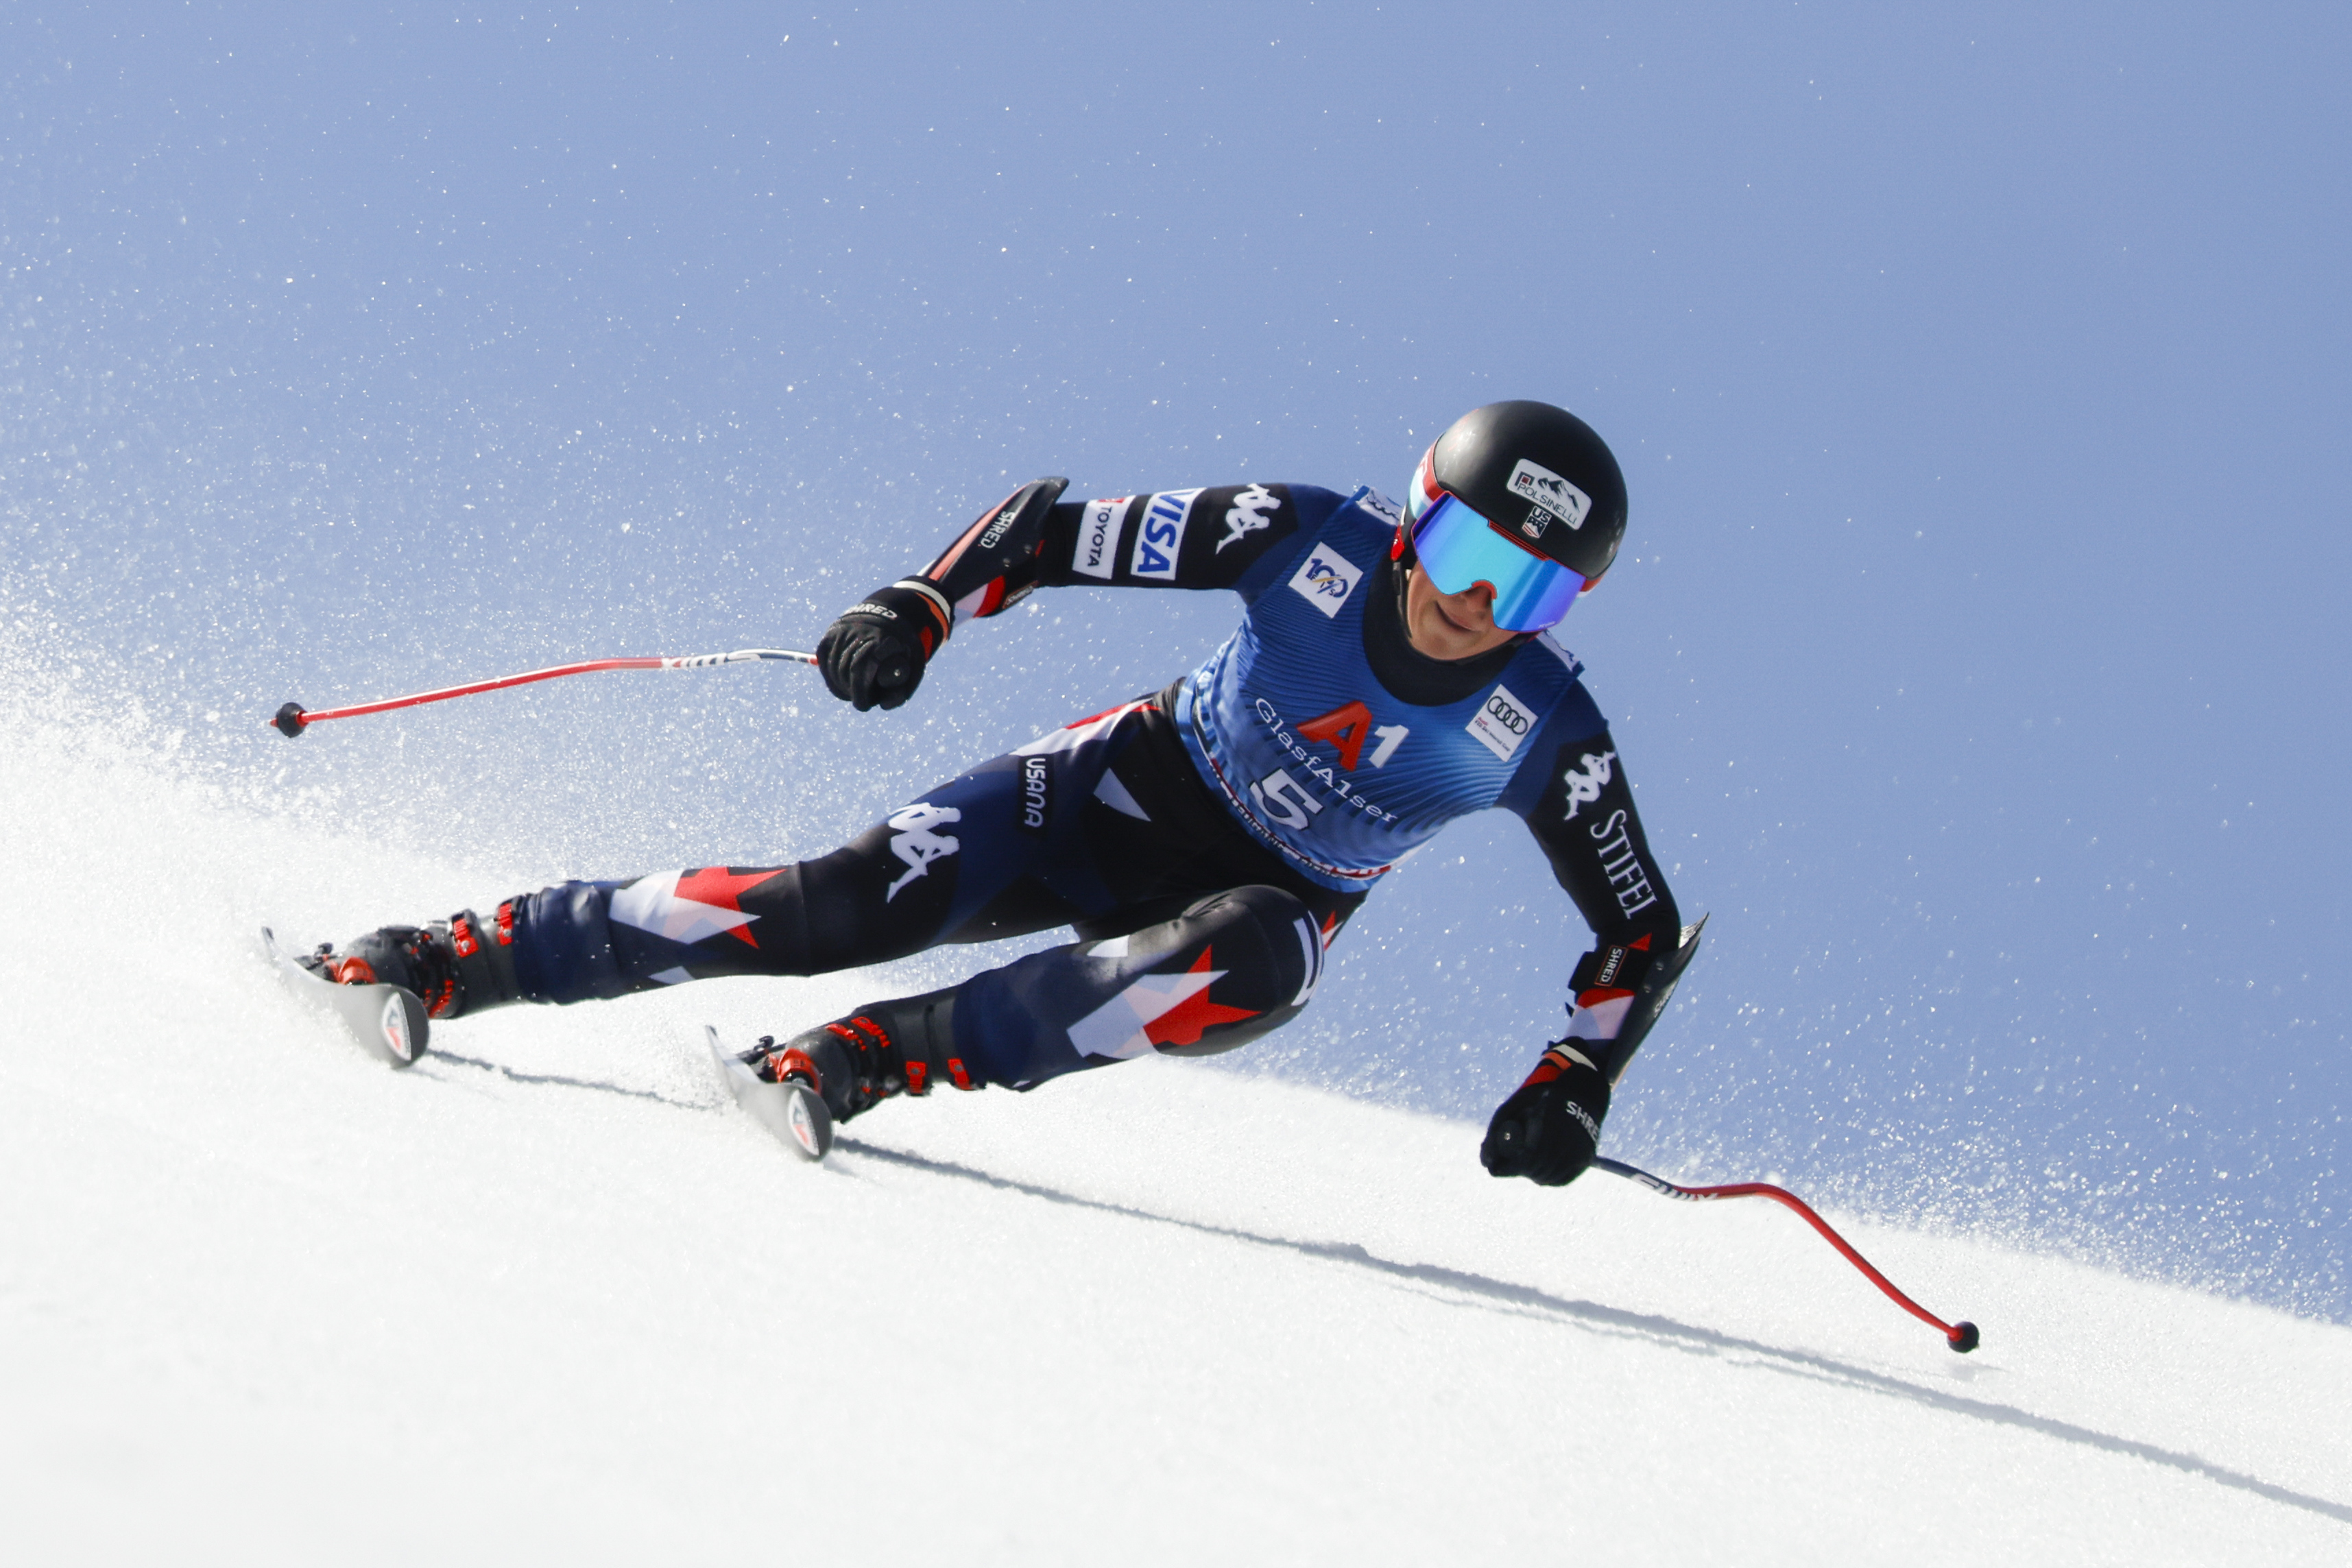 Lauren Macuga competes in the super-G at World Cup Finals in Saalbach, Austria.